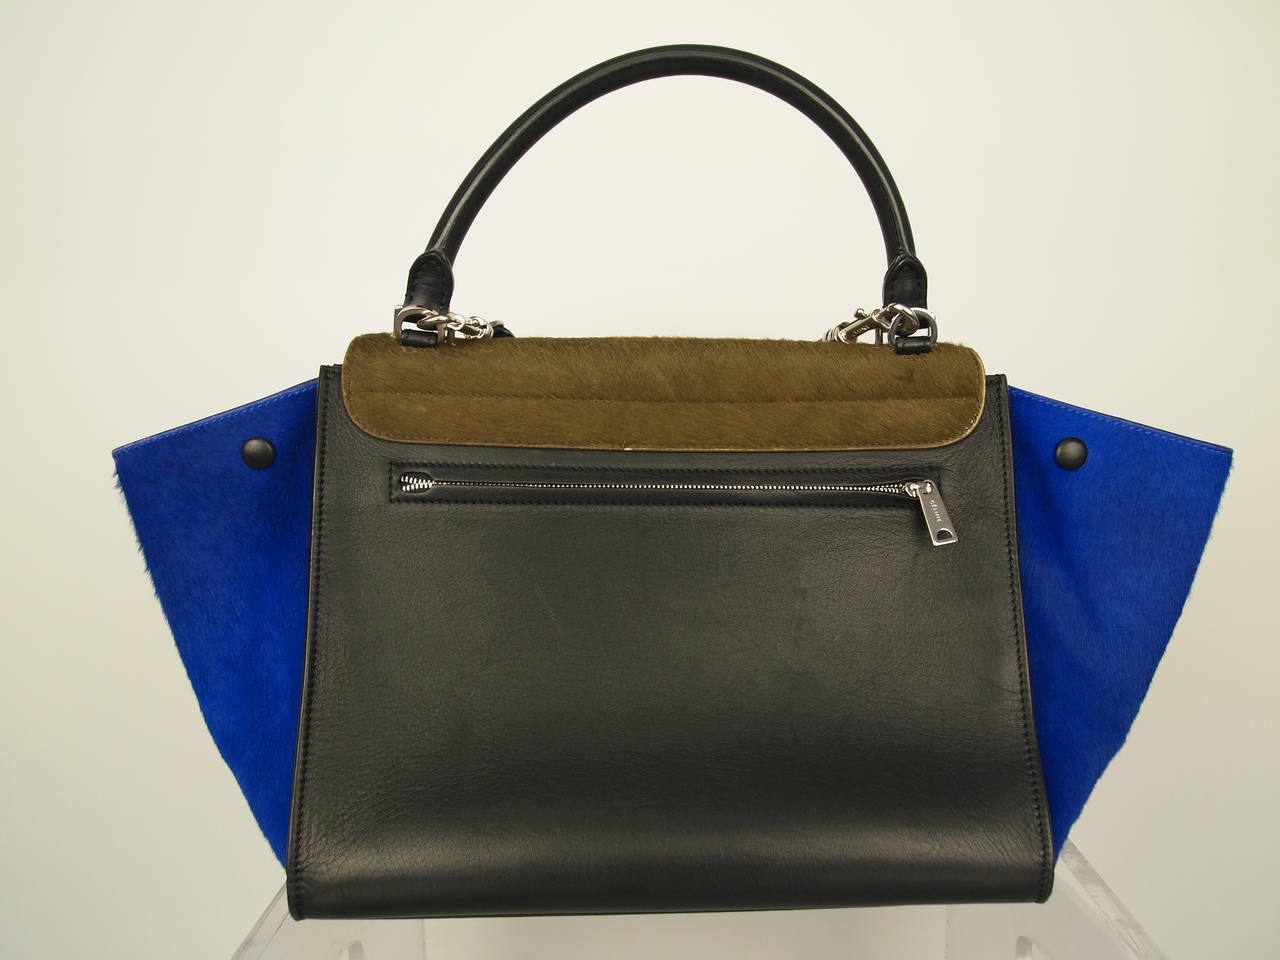 Celine Trapeze pony hair trapeze handbag, top handle,removable leather shoulder strap, two interior pockets, outer back zipper pocket and a clip-lock closure.